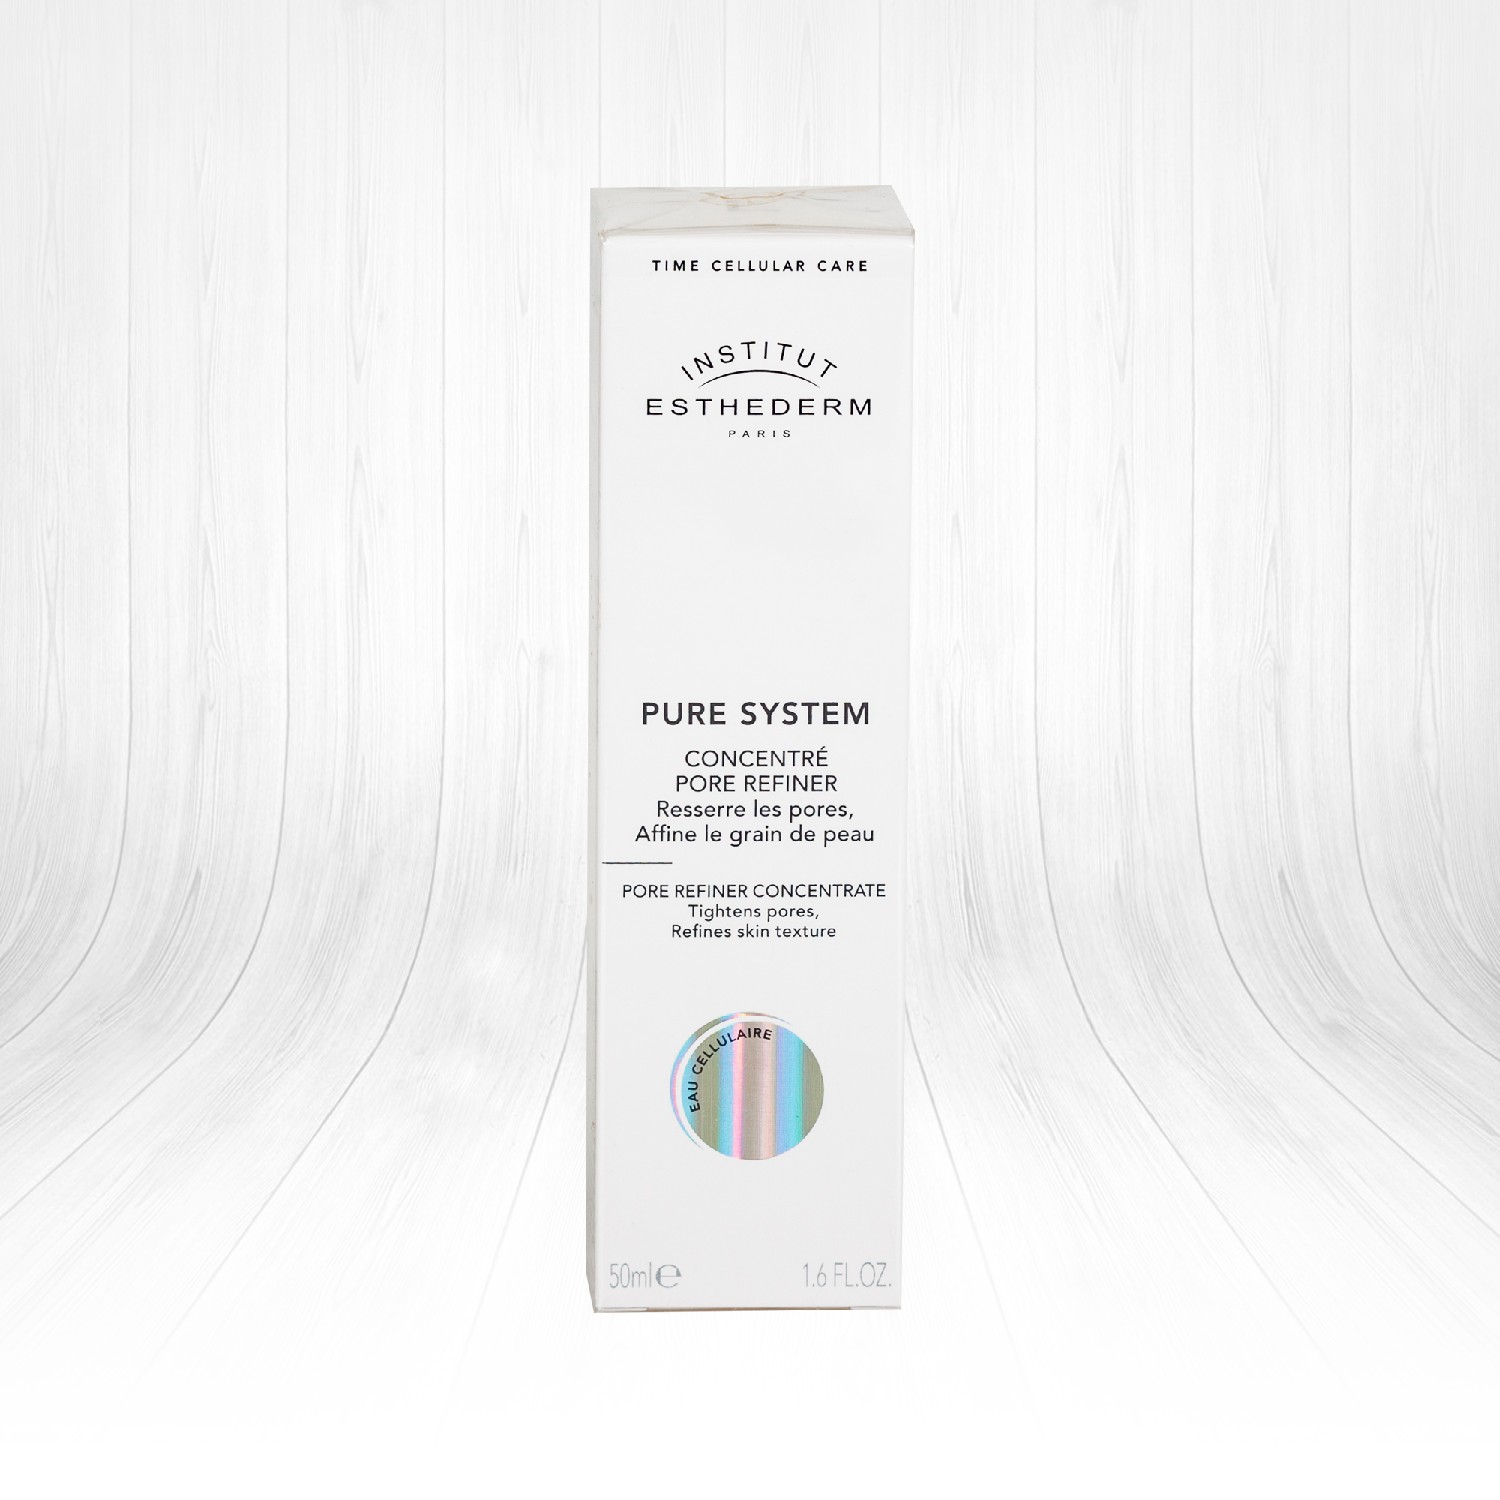 Esthederm Pure System Pure Refiner Concentrate